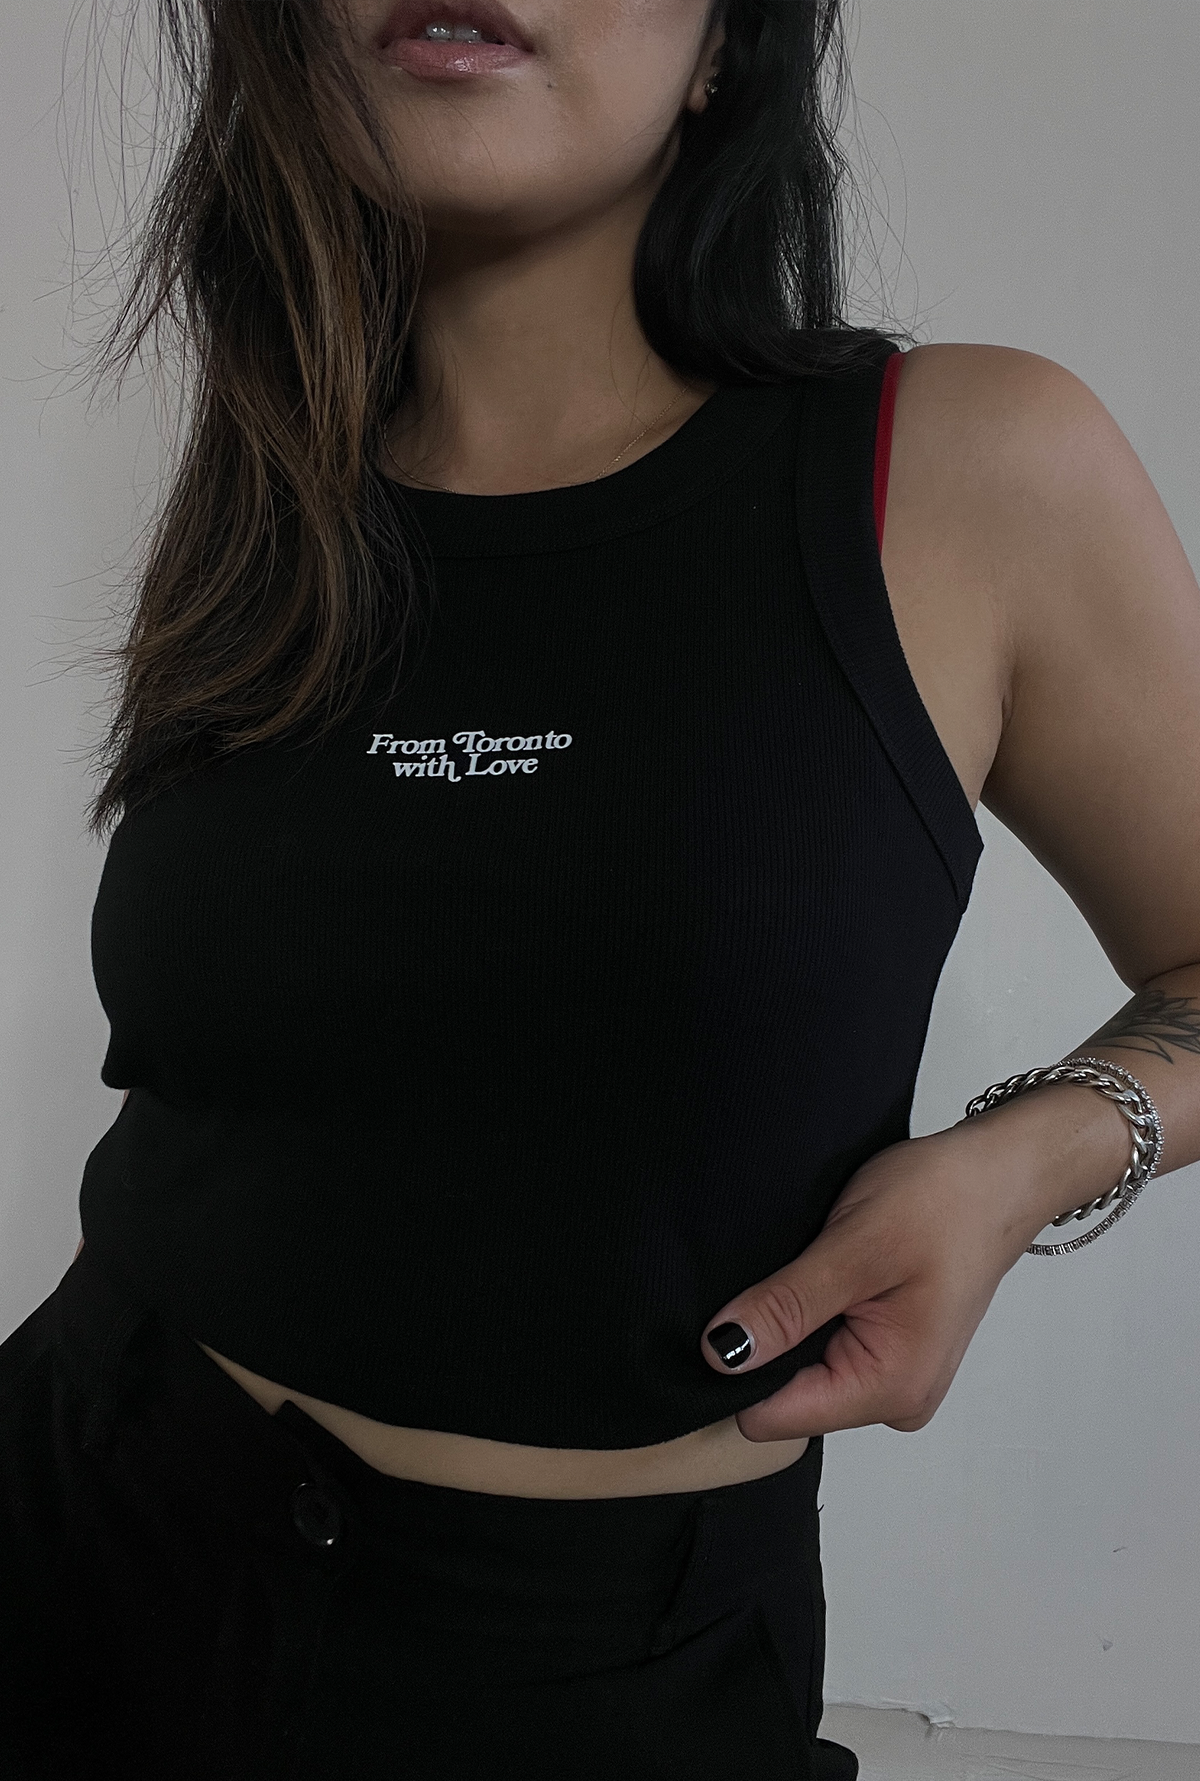 From Toronto with Love WOs Rib Crop Tank - Black